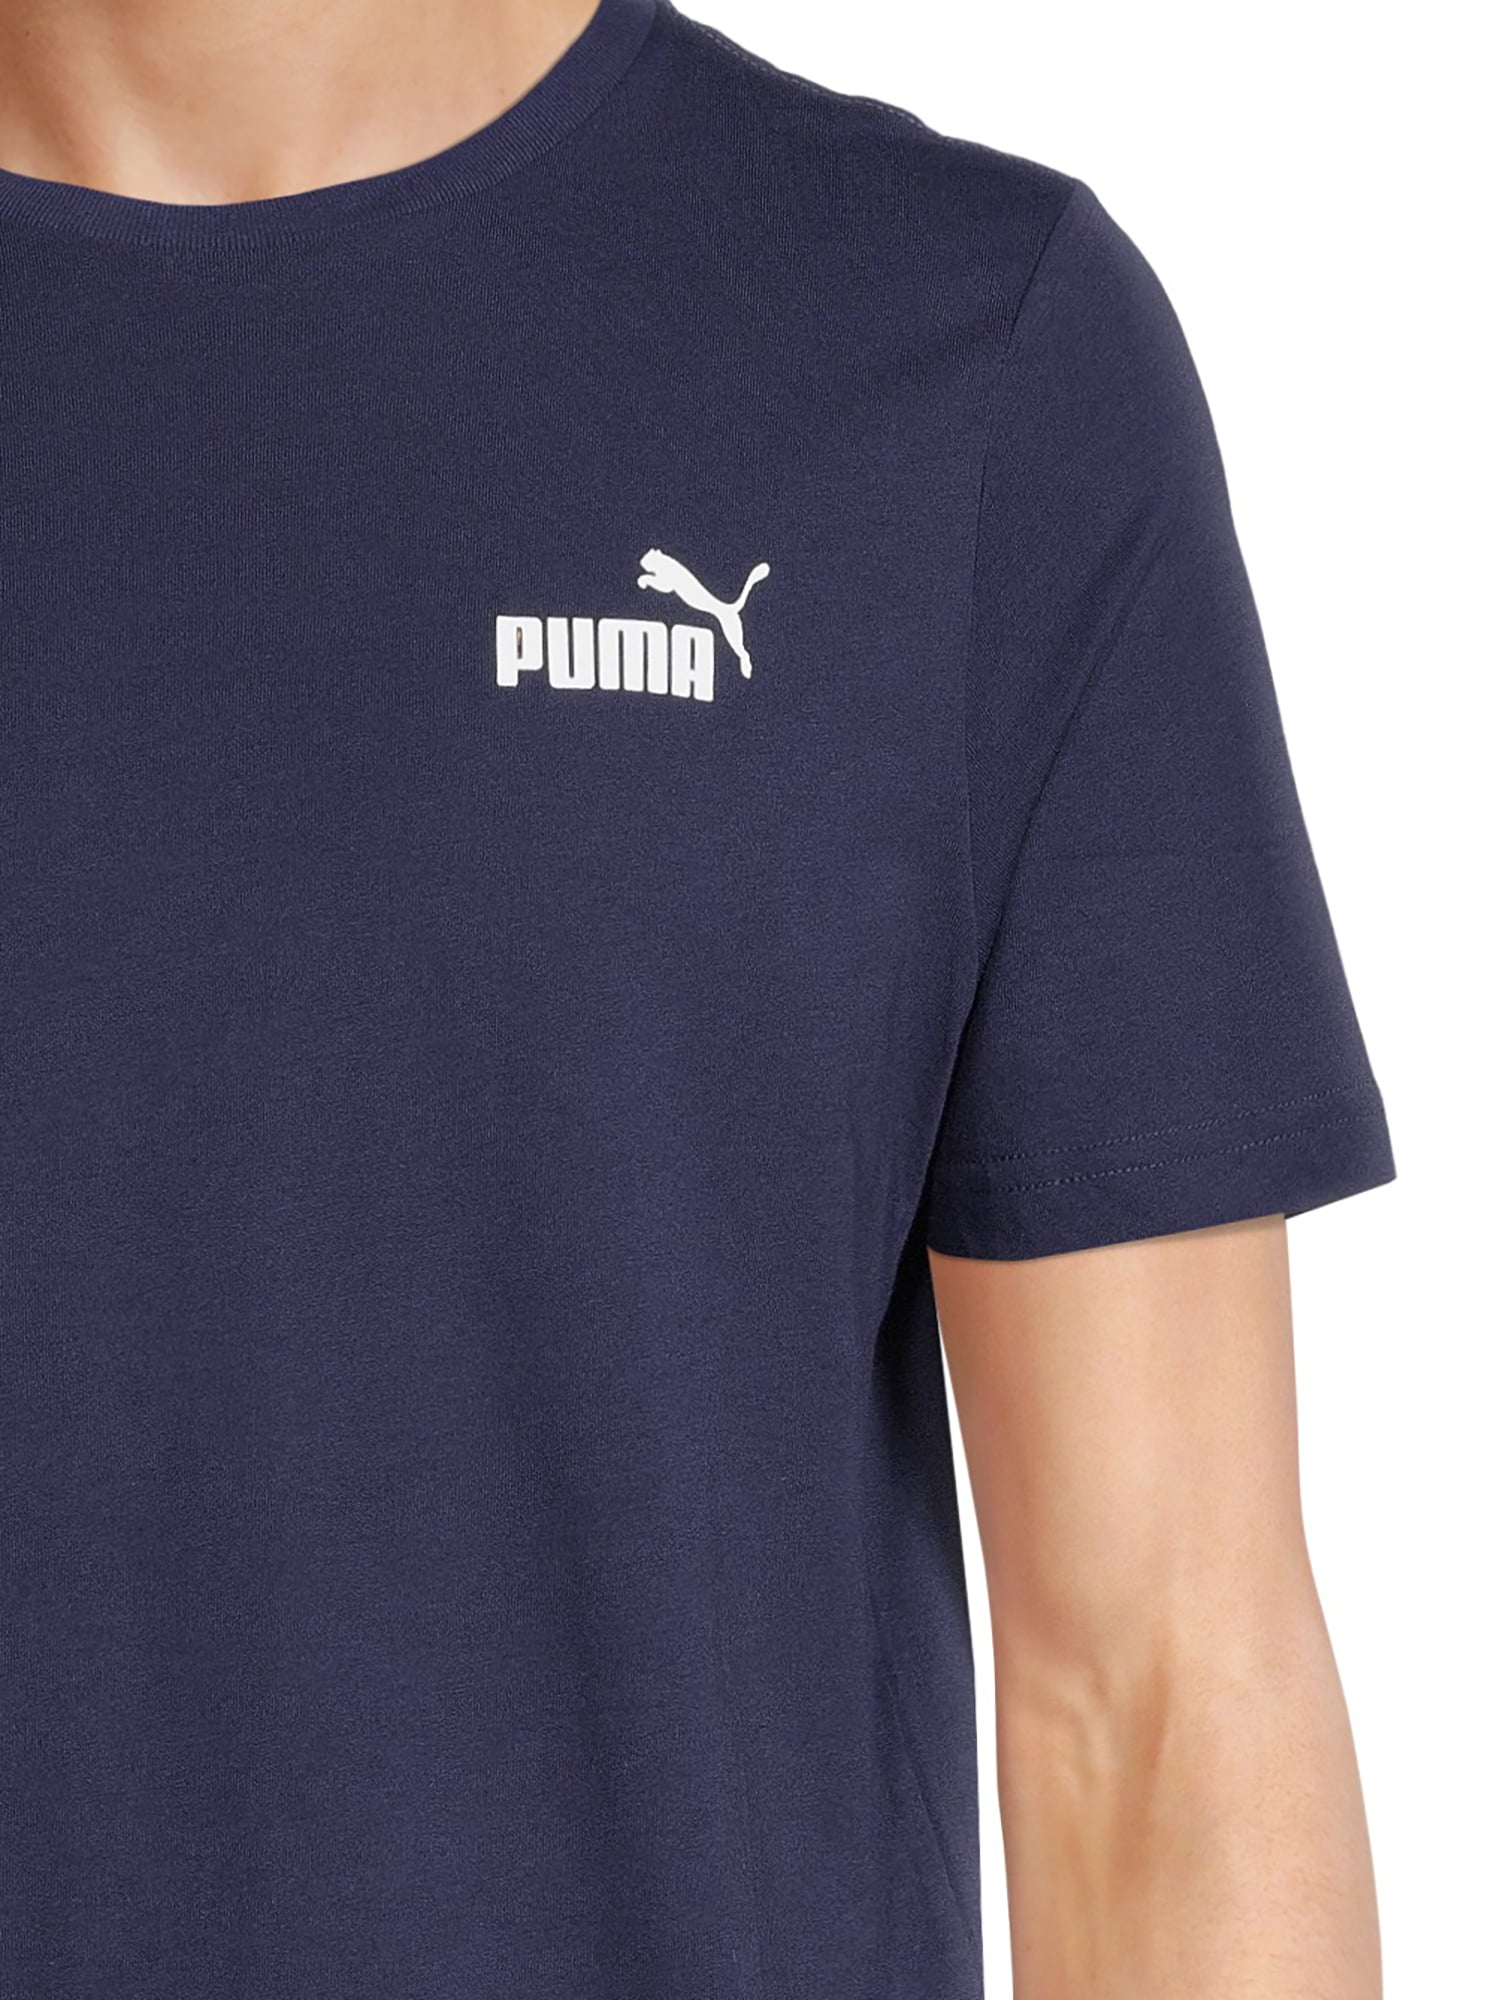 PUMA Men's and Big Men's Essential Chest Logo Tee Shirt, sizes S to 2XL